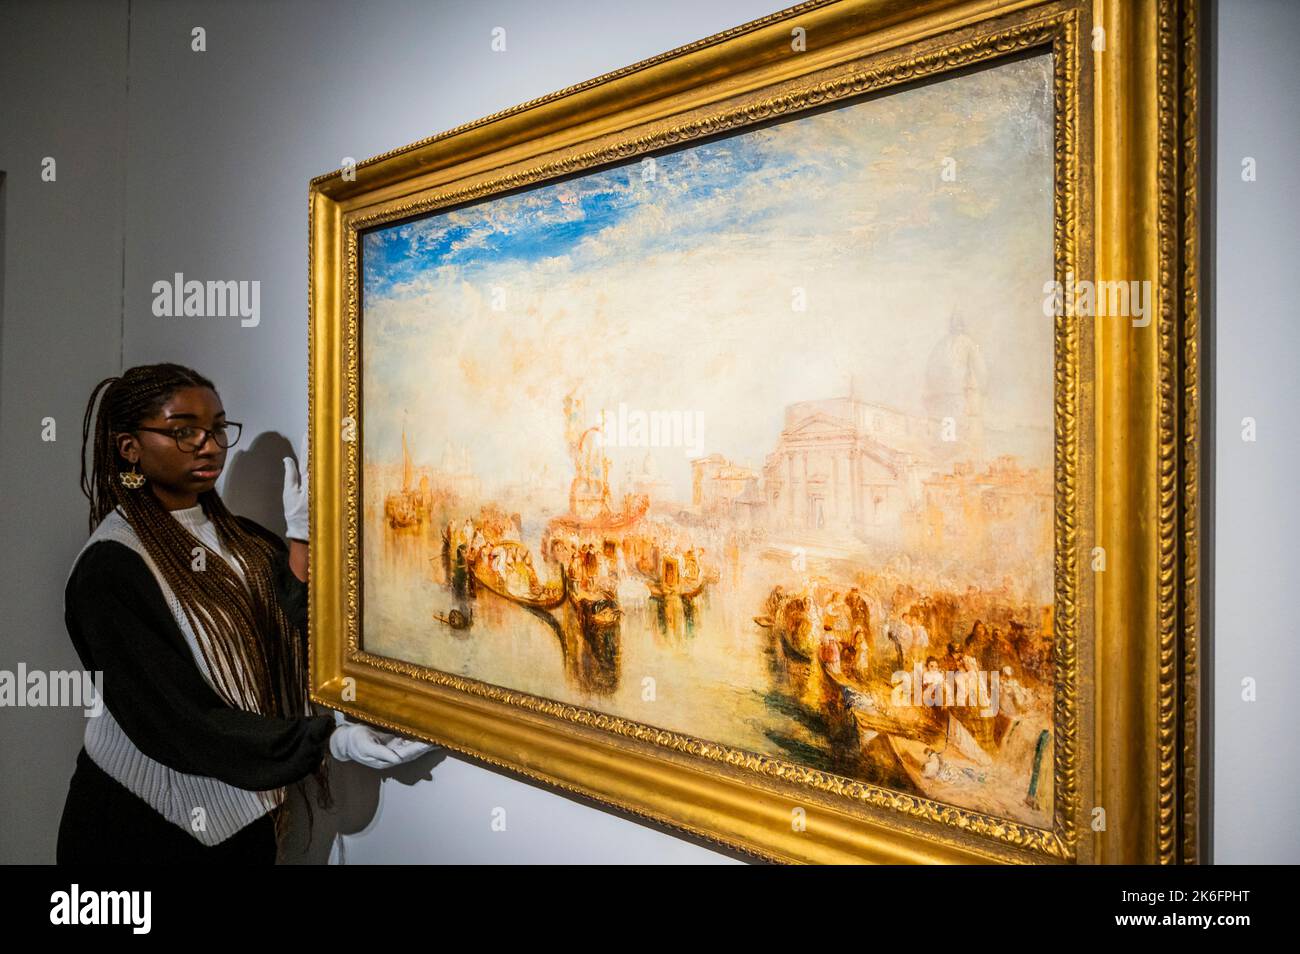 London, UK. 13th Oct, 2022. Joseph Mallord William Turner, Depositing of John Bellini's Three Pictures in La Chiesa Redentore, Venice, Estimate on request: in excess of $30,000,000 - Works from the estate of the philanthropist and co-founder of Microsoft, Paul G. Allen at Christies London. A free public exhibition runs from 14-17 October. All of the proceeds from the sale (New York - 9 & 10 November), will benefit philanthropic causes Credit: Guy Bell/Alamy Live News Stock Photo